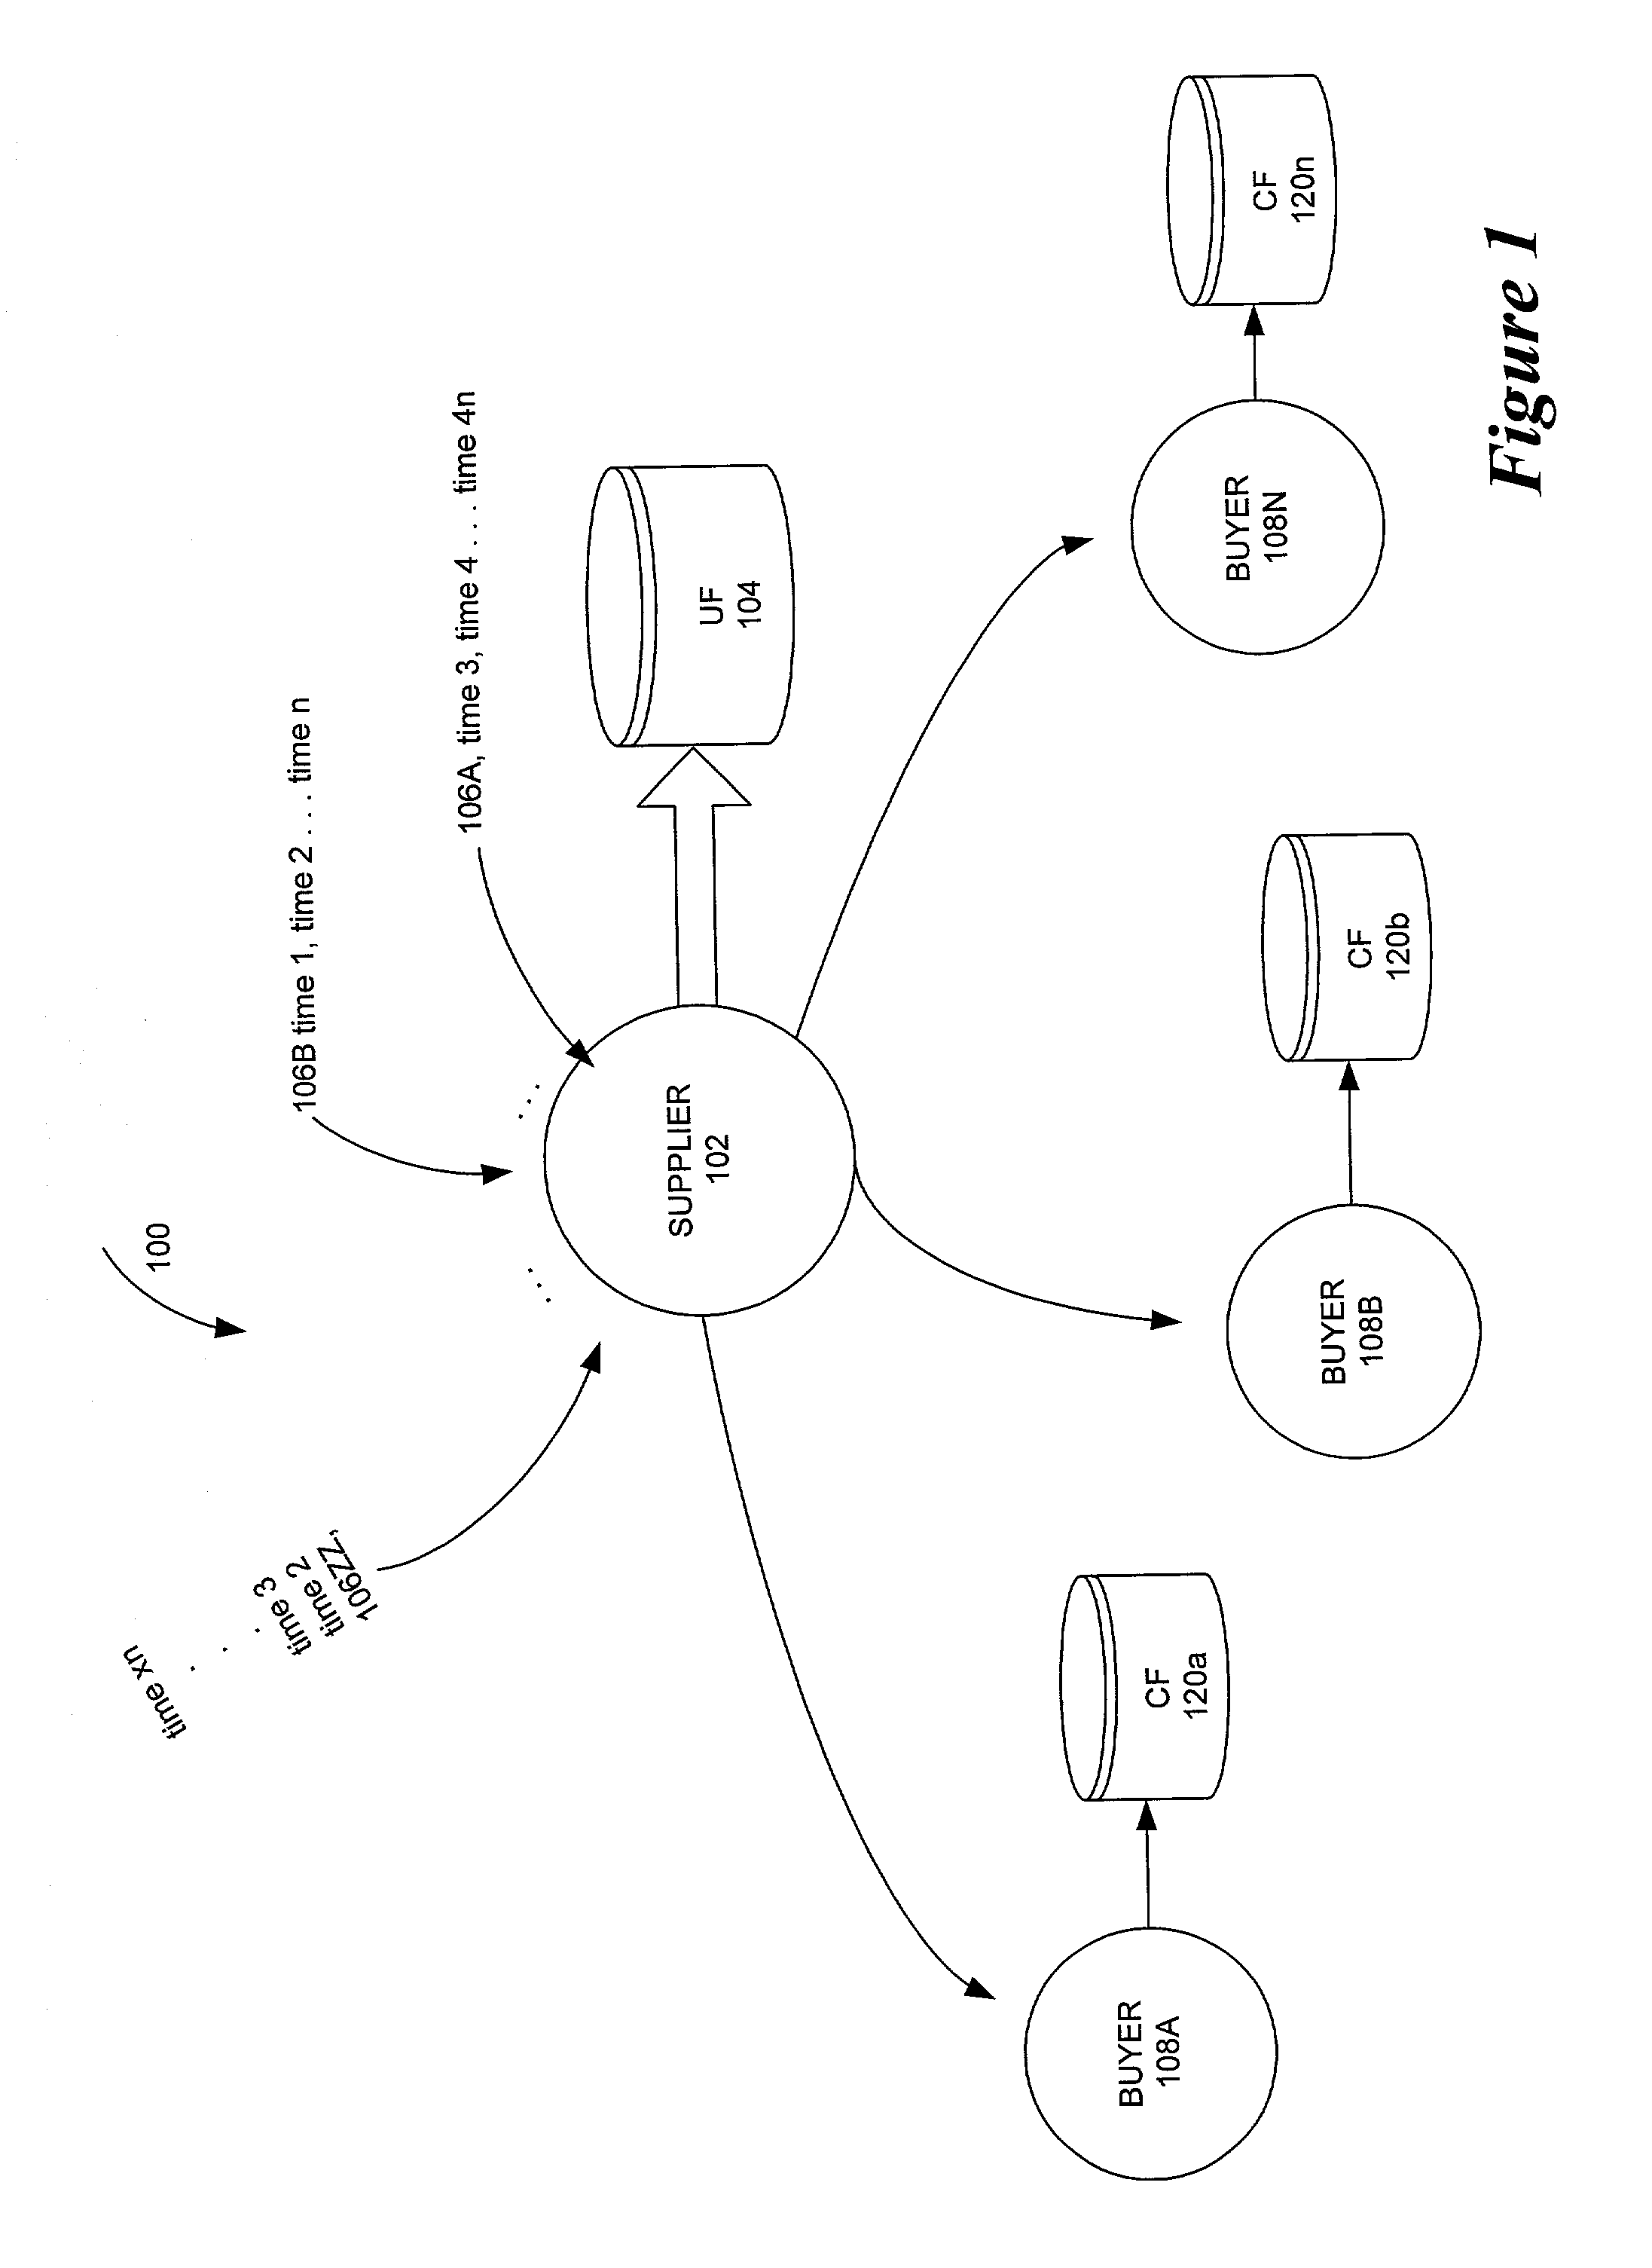 System and method for managing and updating information relating to economic entities